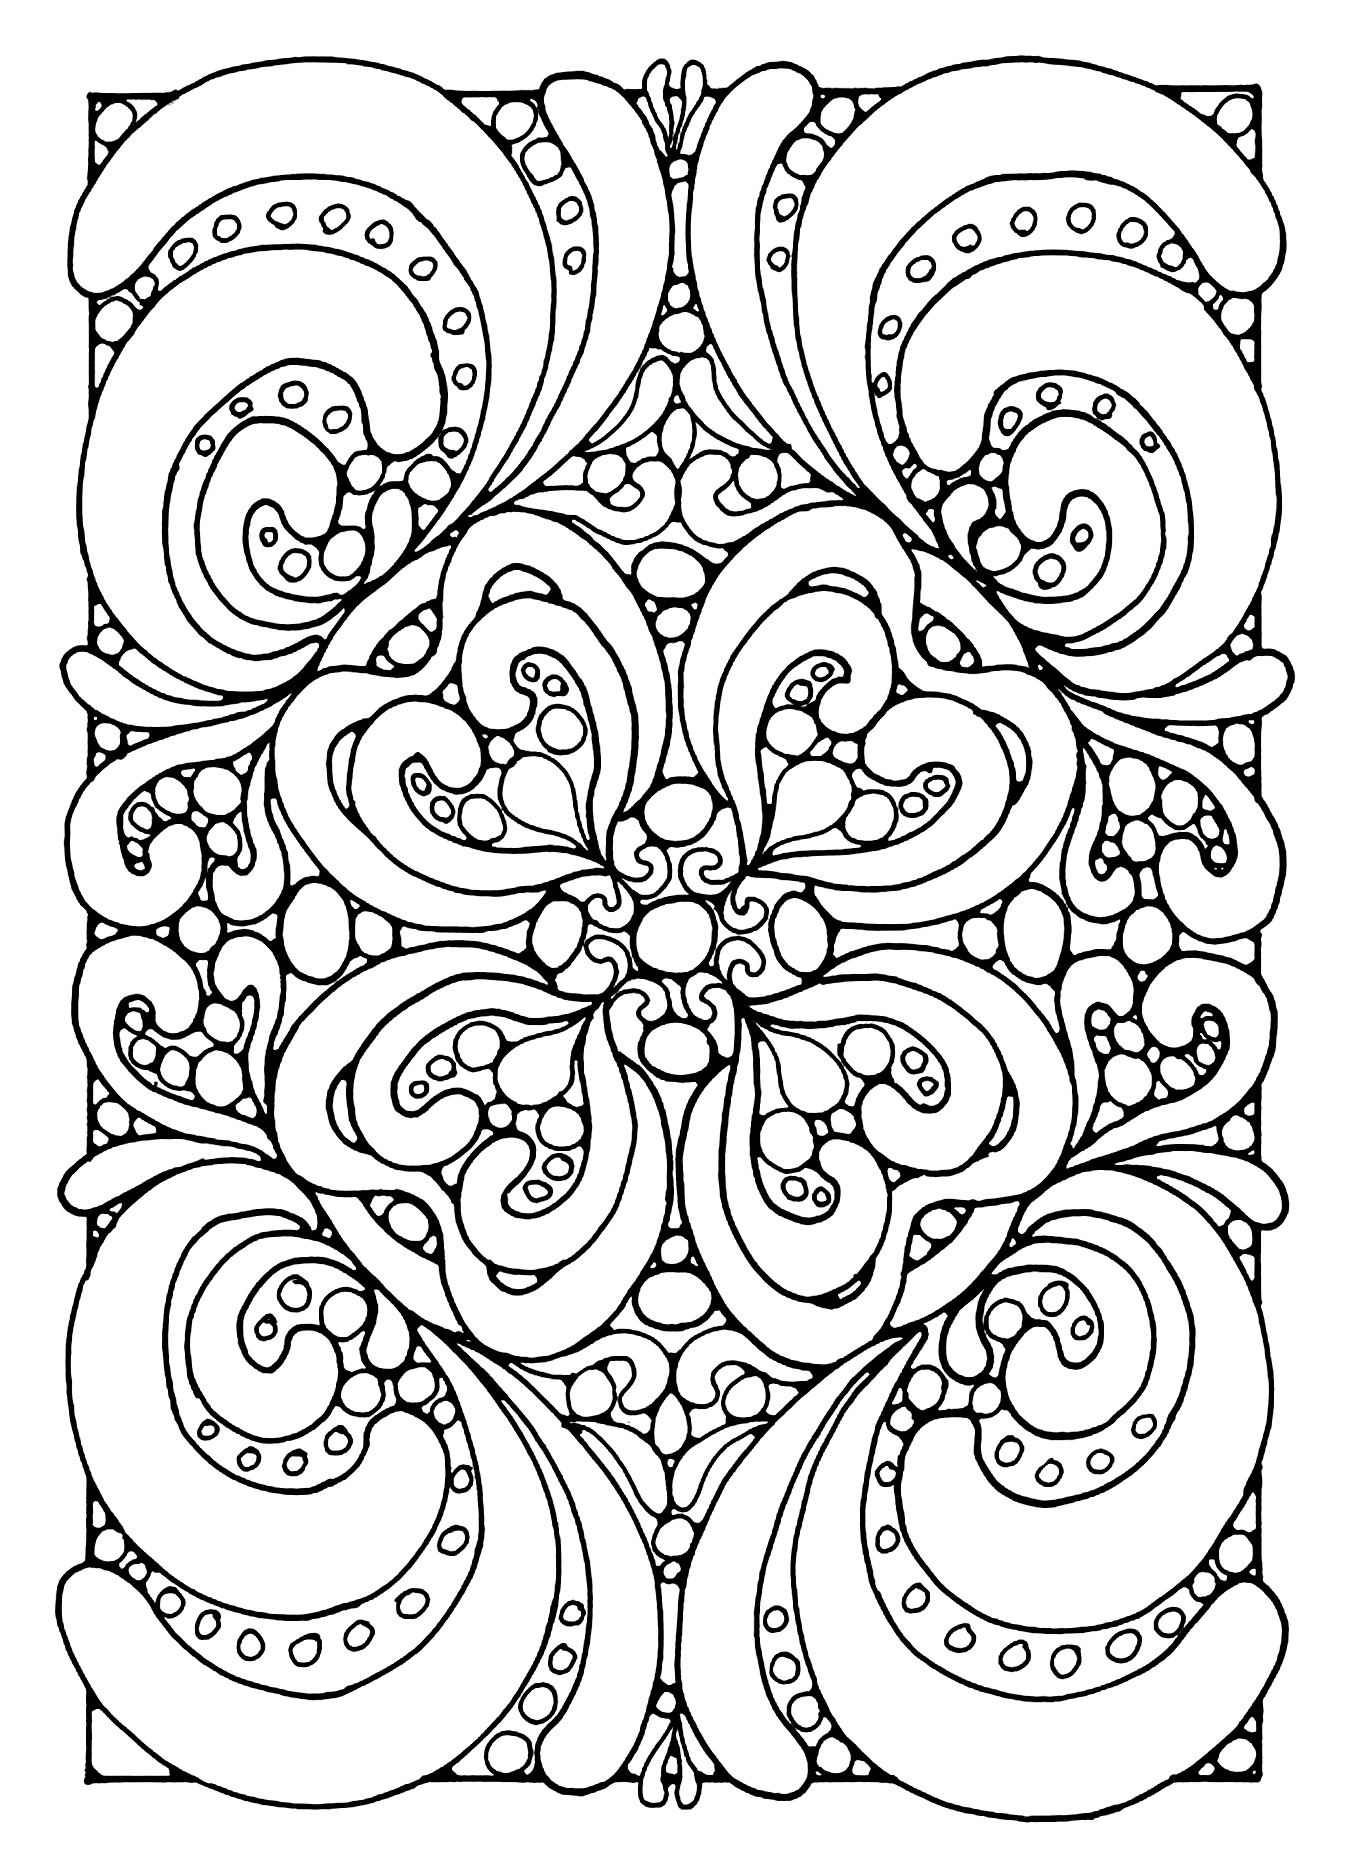 Zen Coloring For Adults Coloring Pages